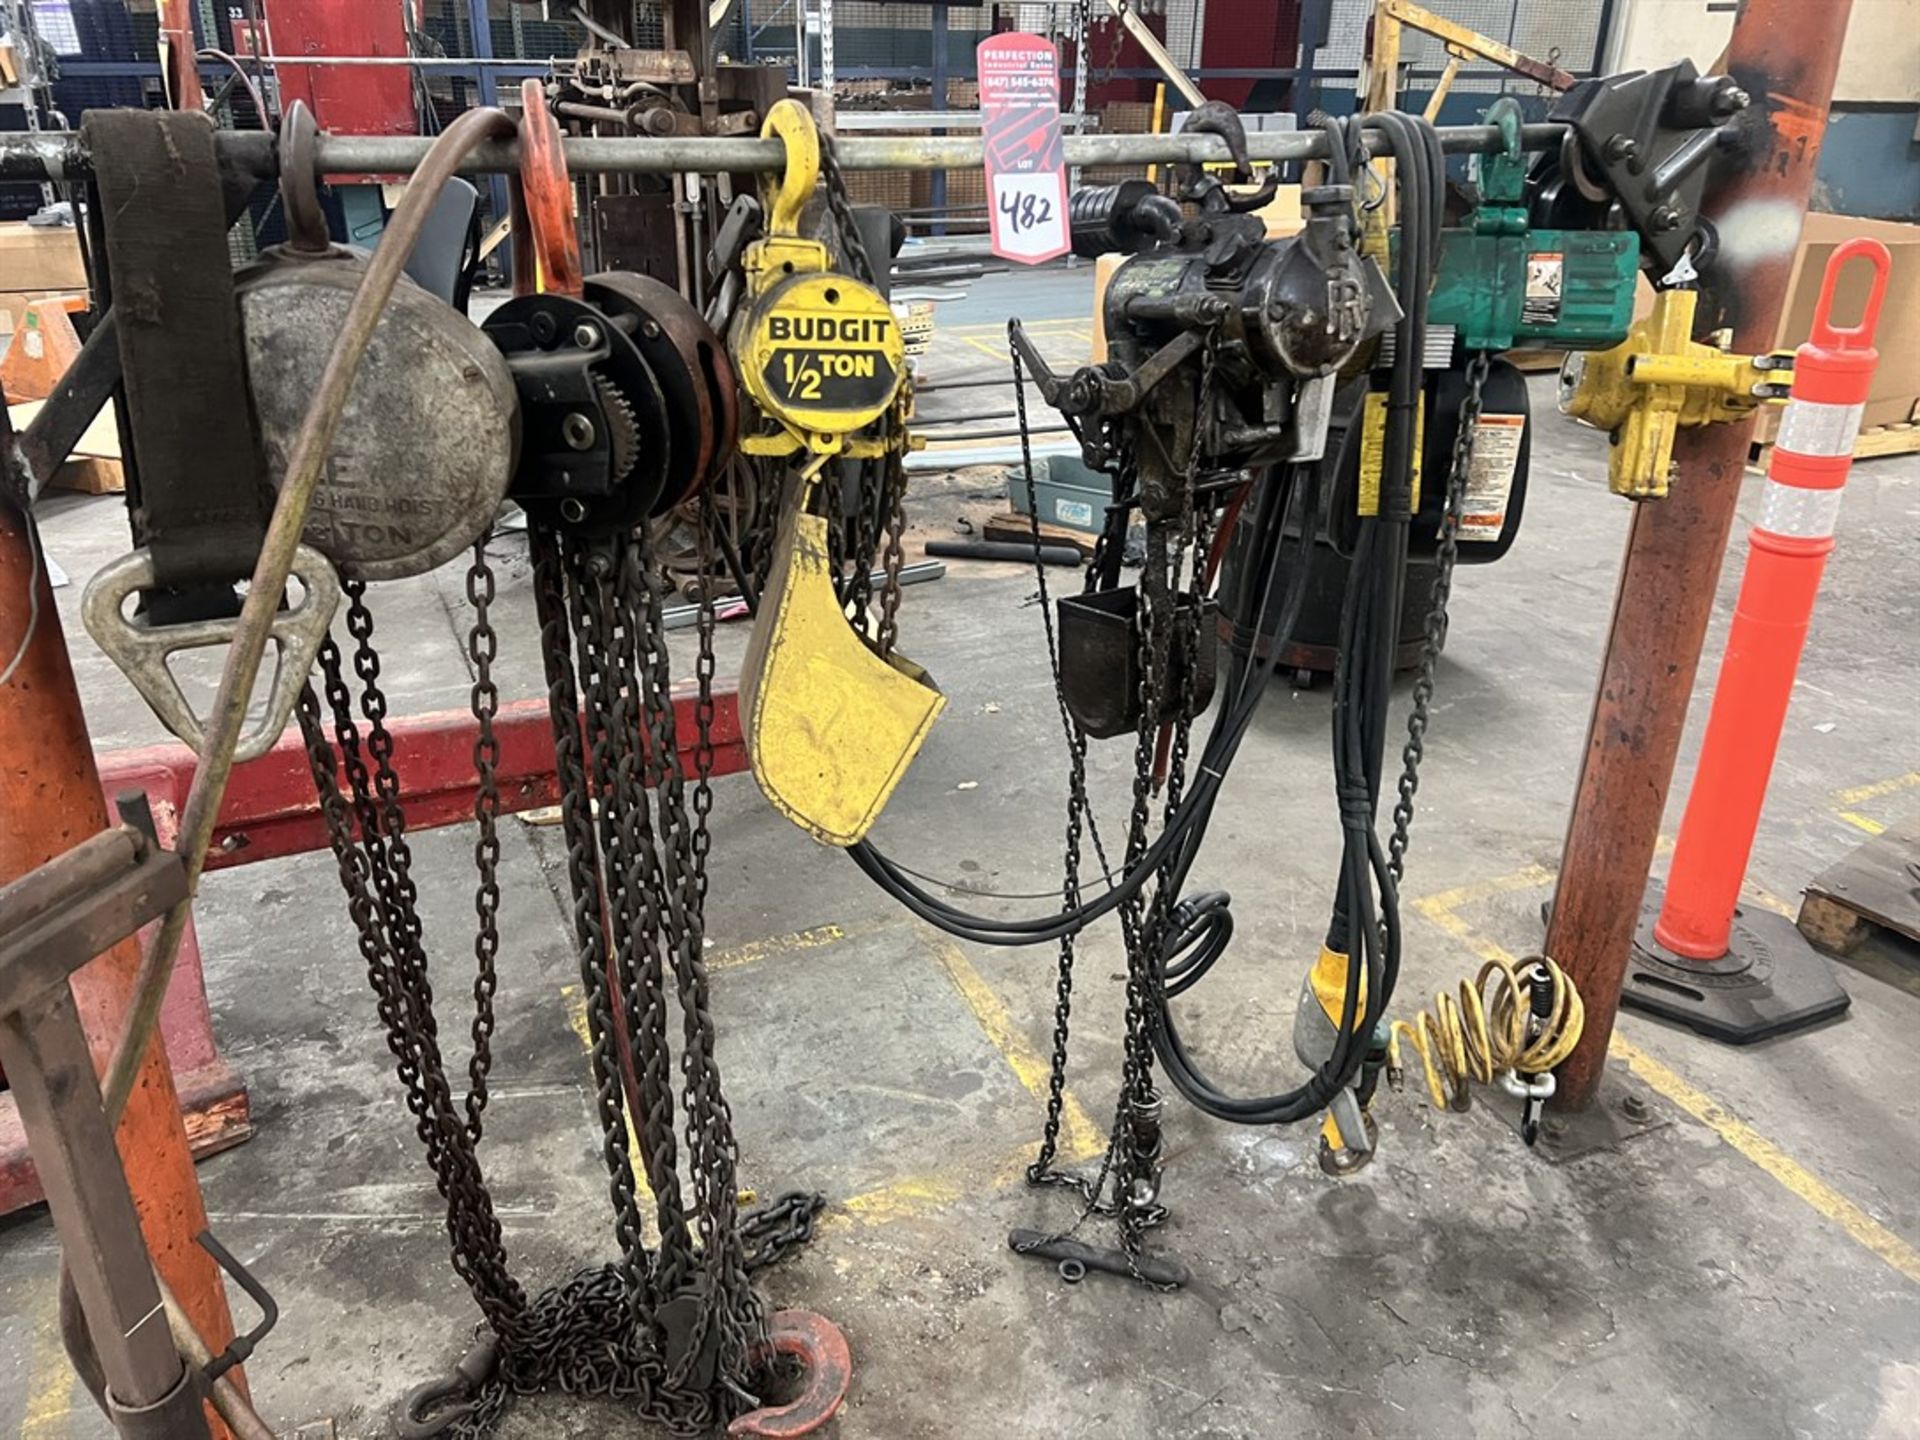 Lot of Chain Falls and Pneumatic Hoists up to 1/2 Ton (BUILDING 16)